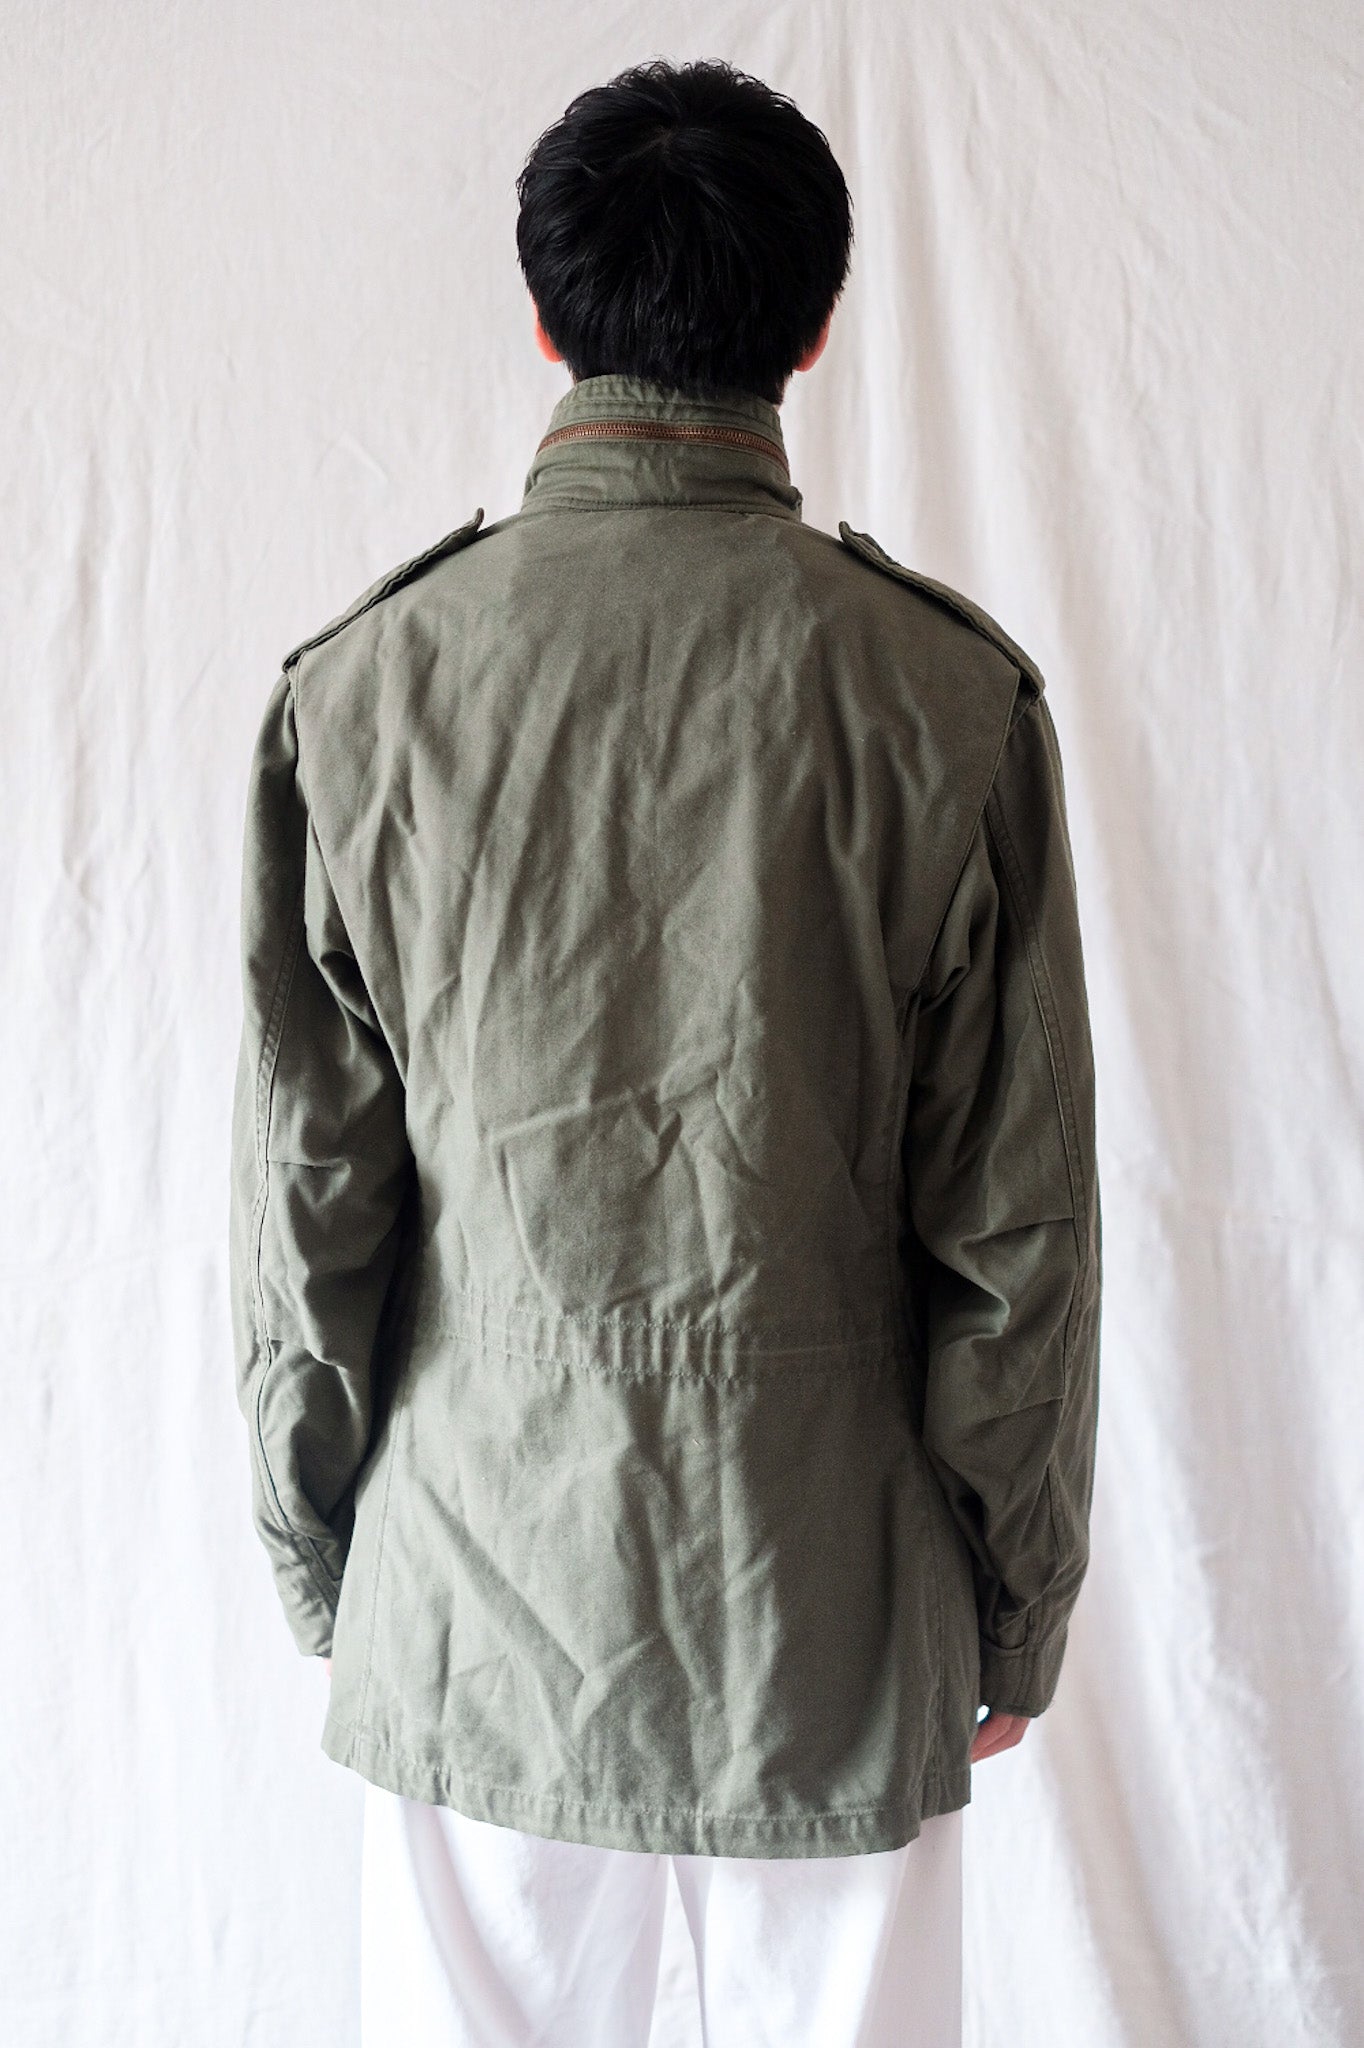 【~80's】US Army M-65 Field Jacket "3rd Type" Size.SMALL REGULAR